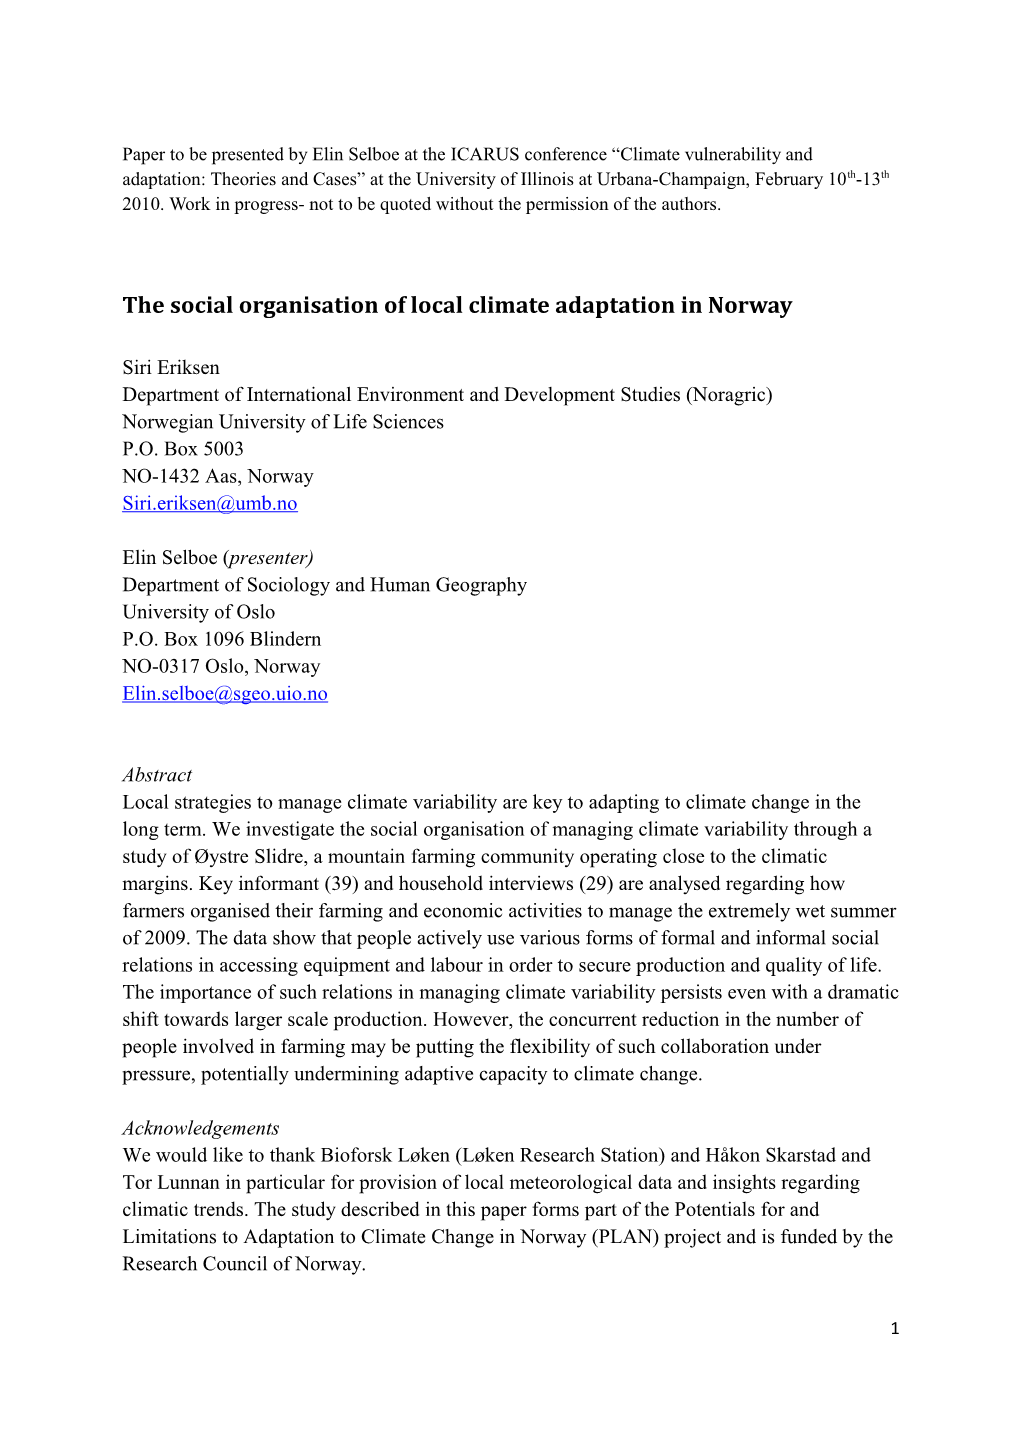 The Social Organisation of Local Climate Adaptation in Norway